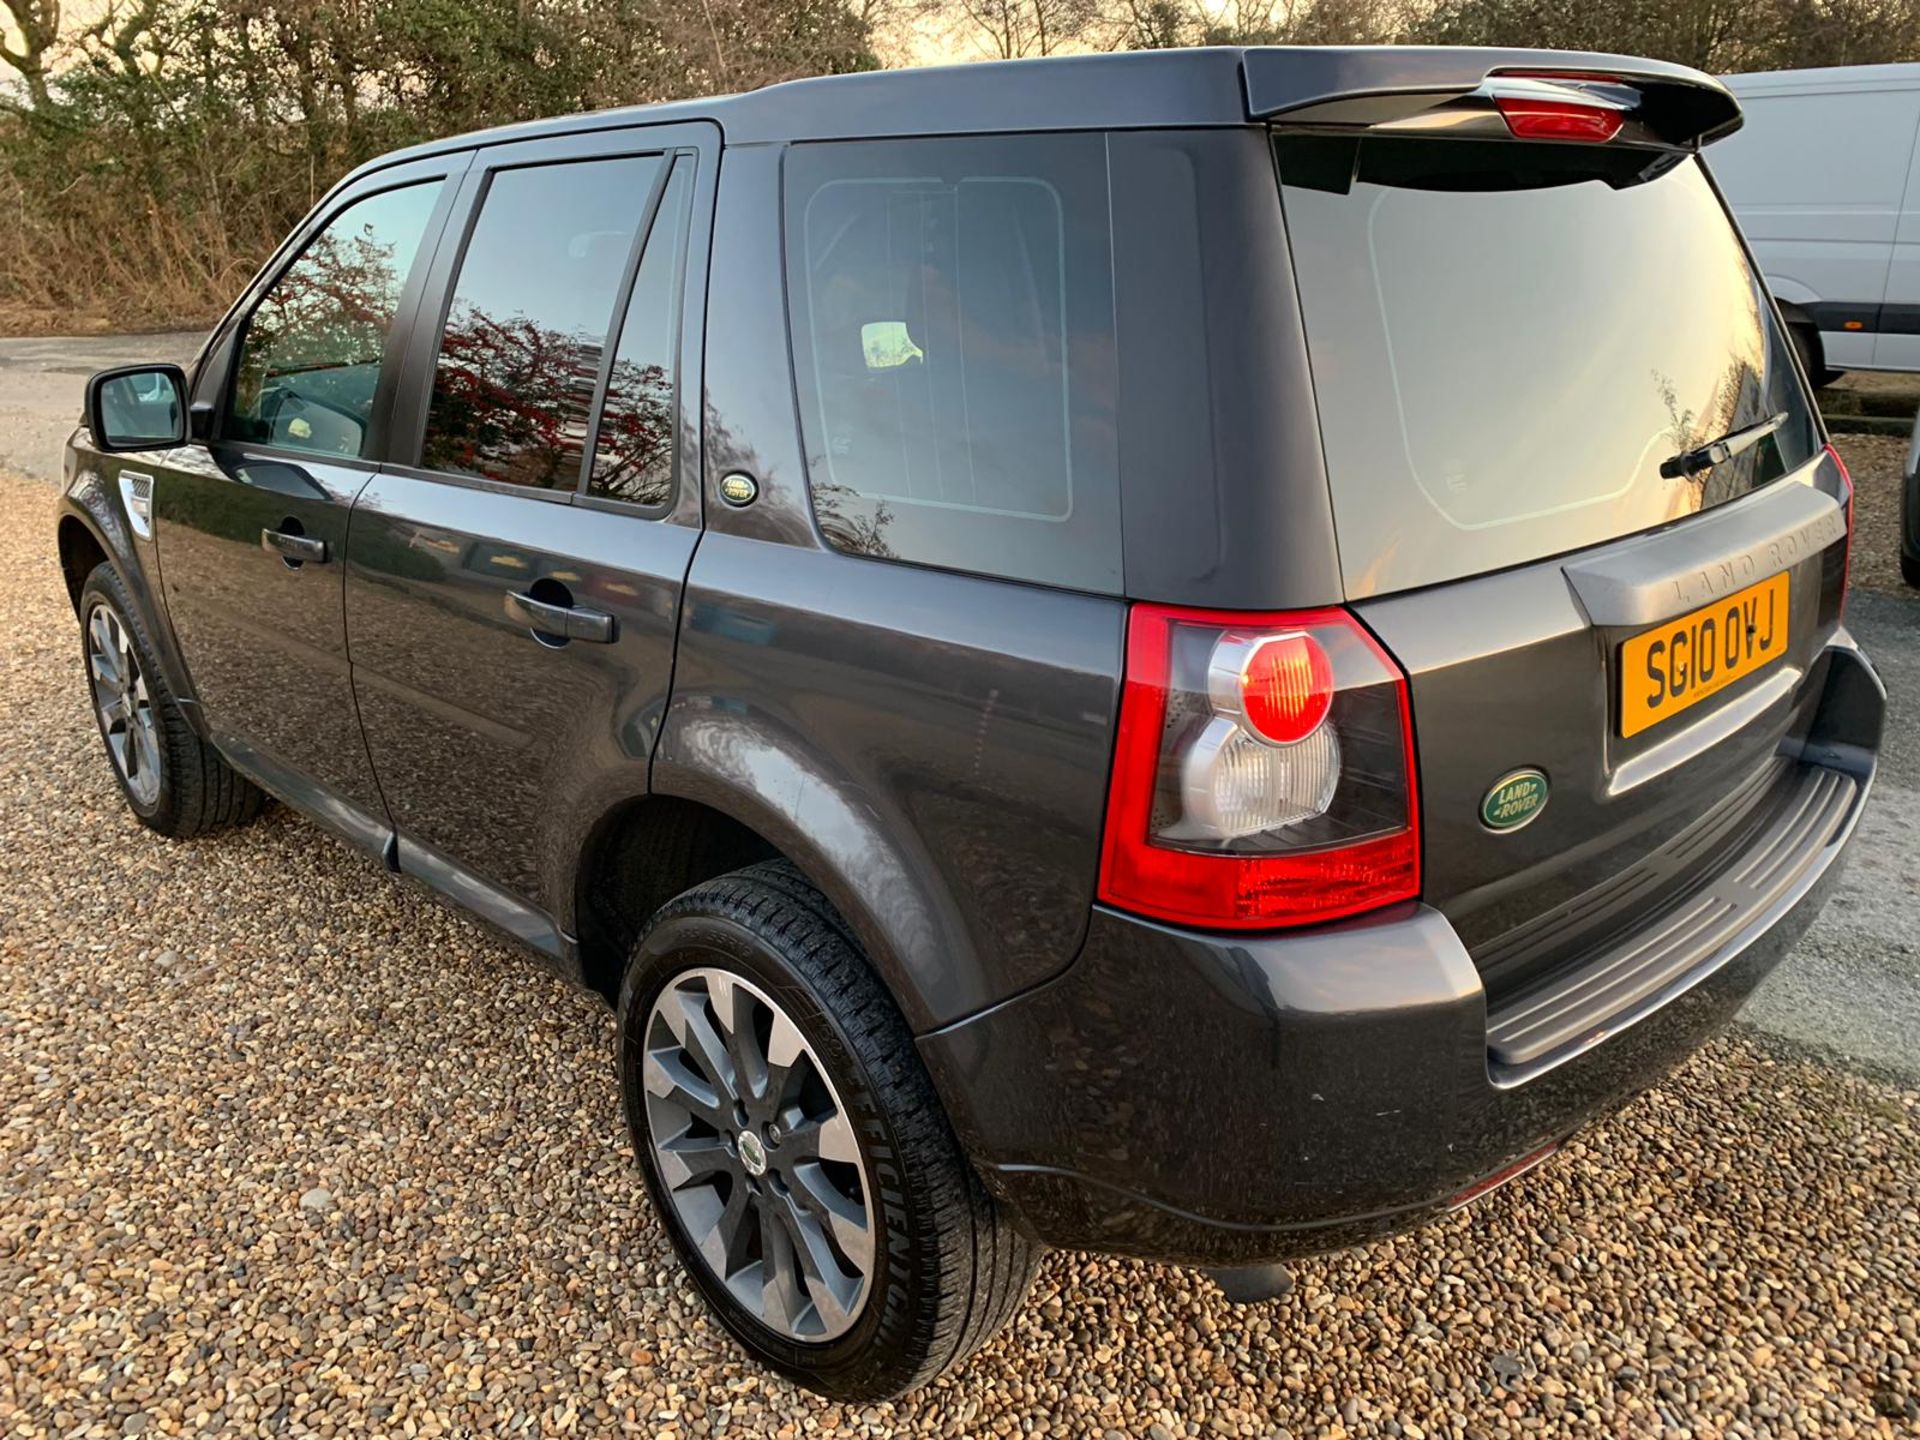 2010/10 REG LAND ROVER FREELANDER SPORT LE TD4 2.2 DIESEL AUTO 4X4, SHOWING 2 FORMER KEEPERS - Image 5 of 13